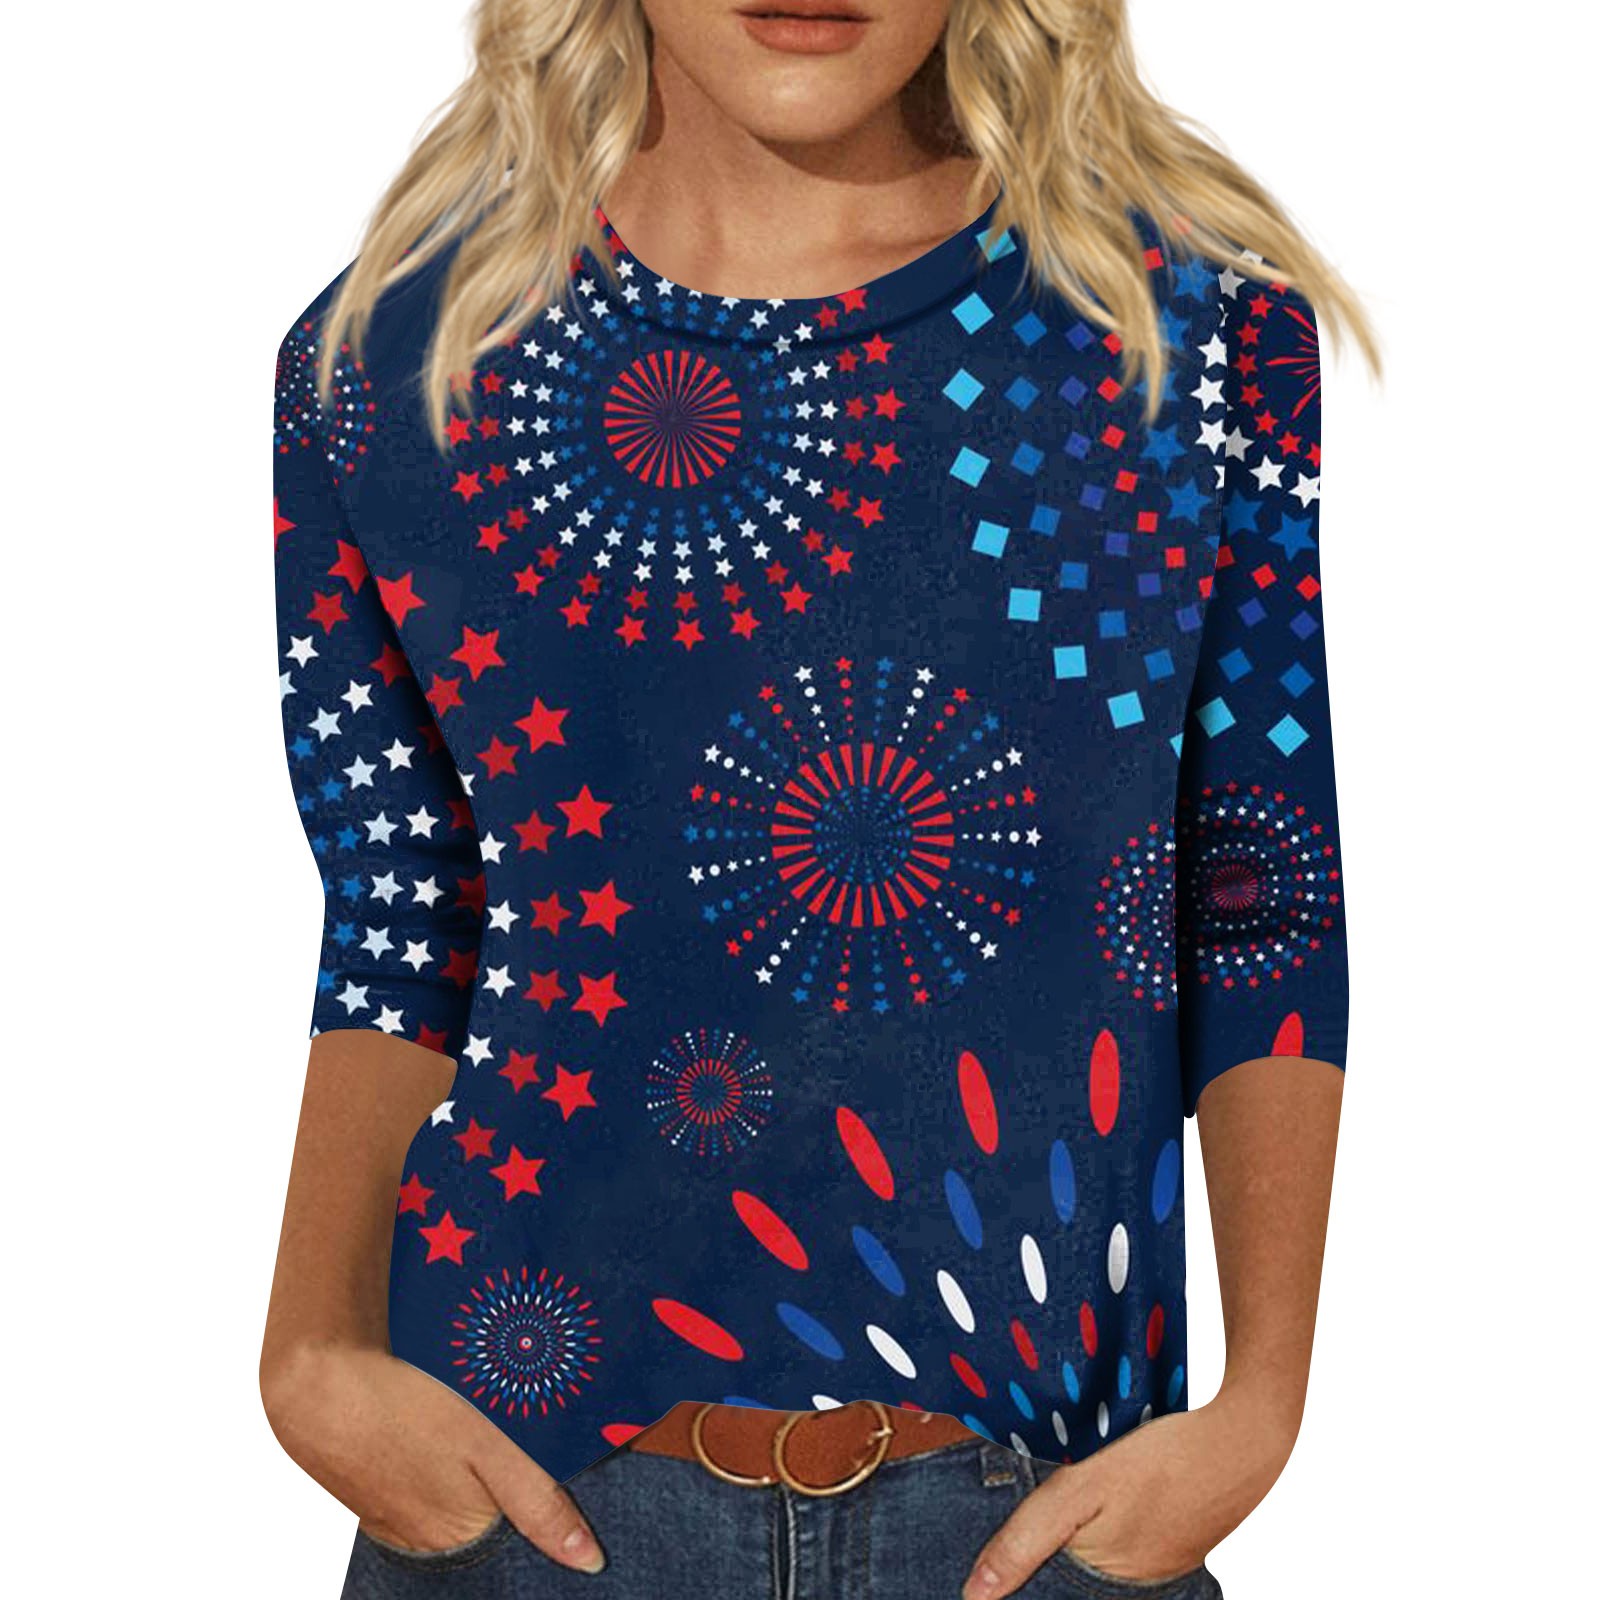 Huresd 4Th of July Shirts for Women 3/4 Sleeve Plus Size Top Hawaiian ...